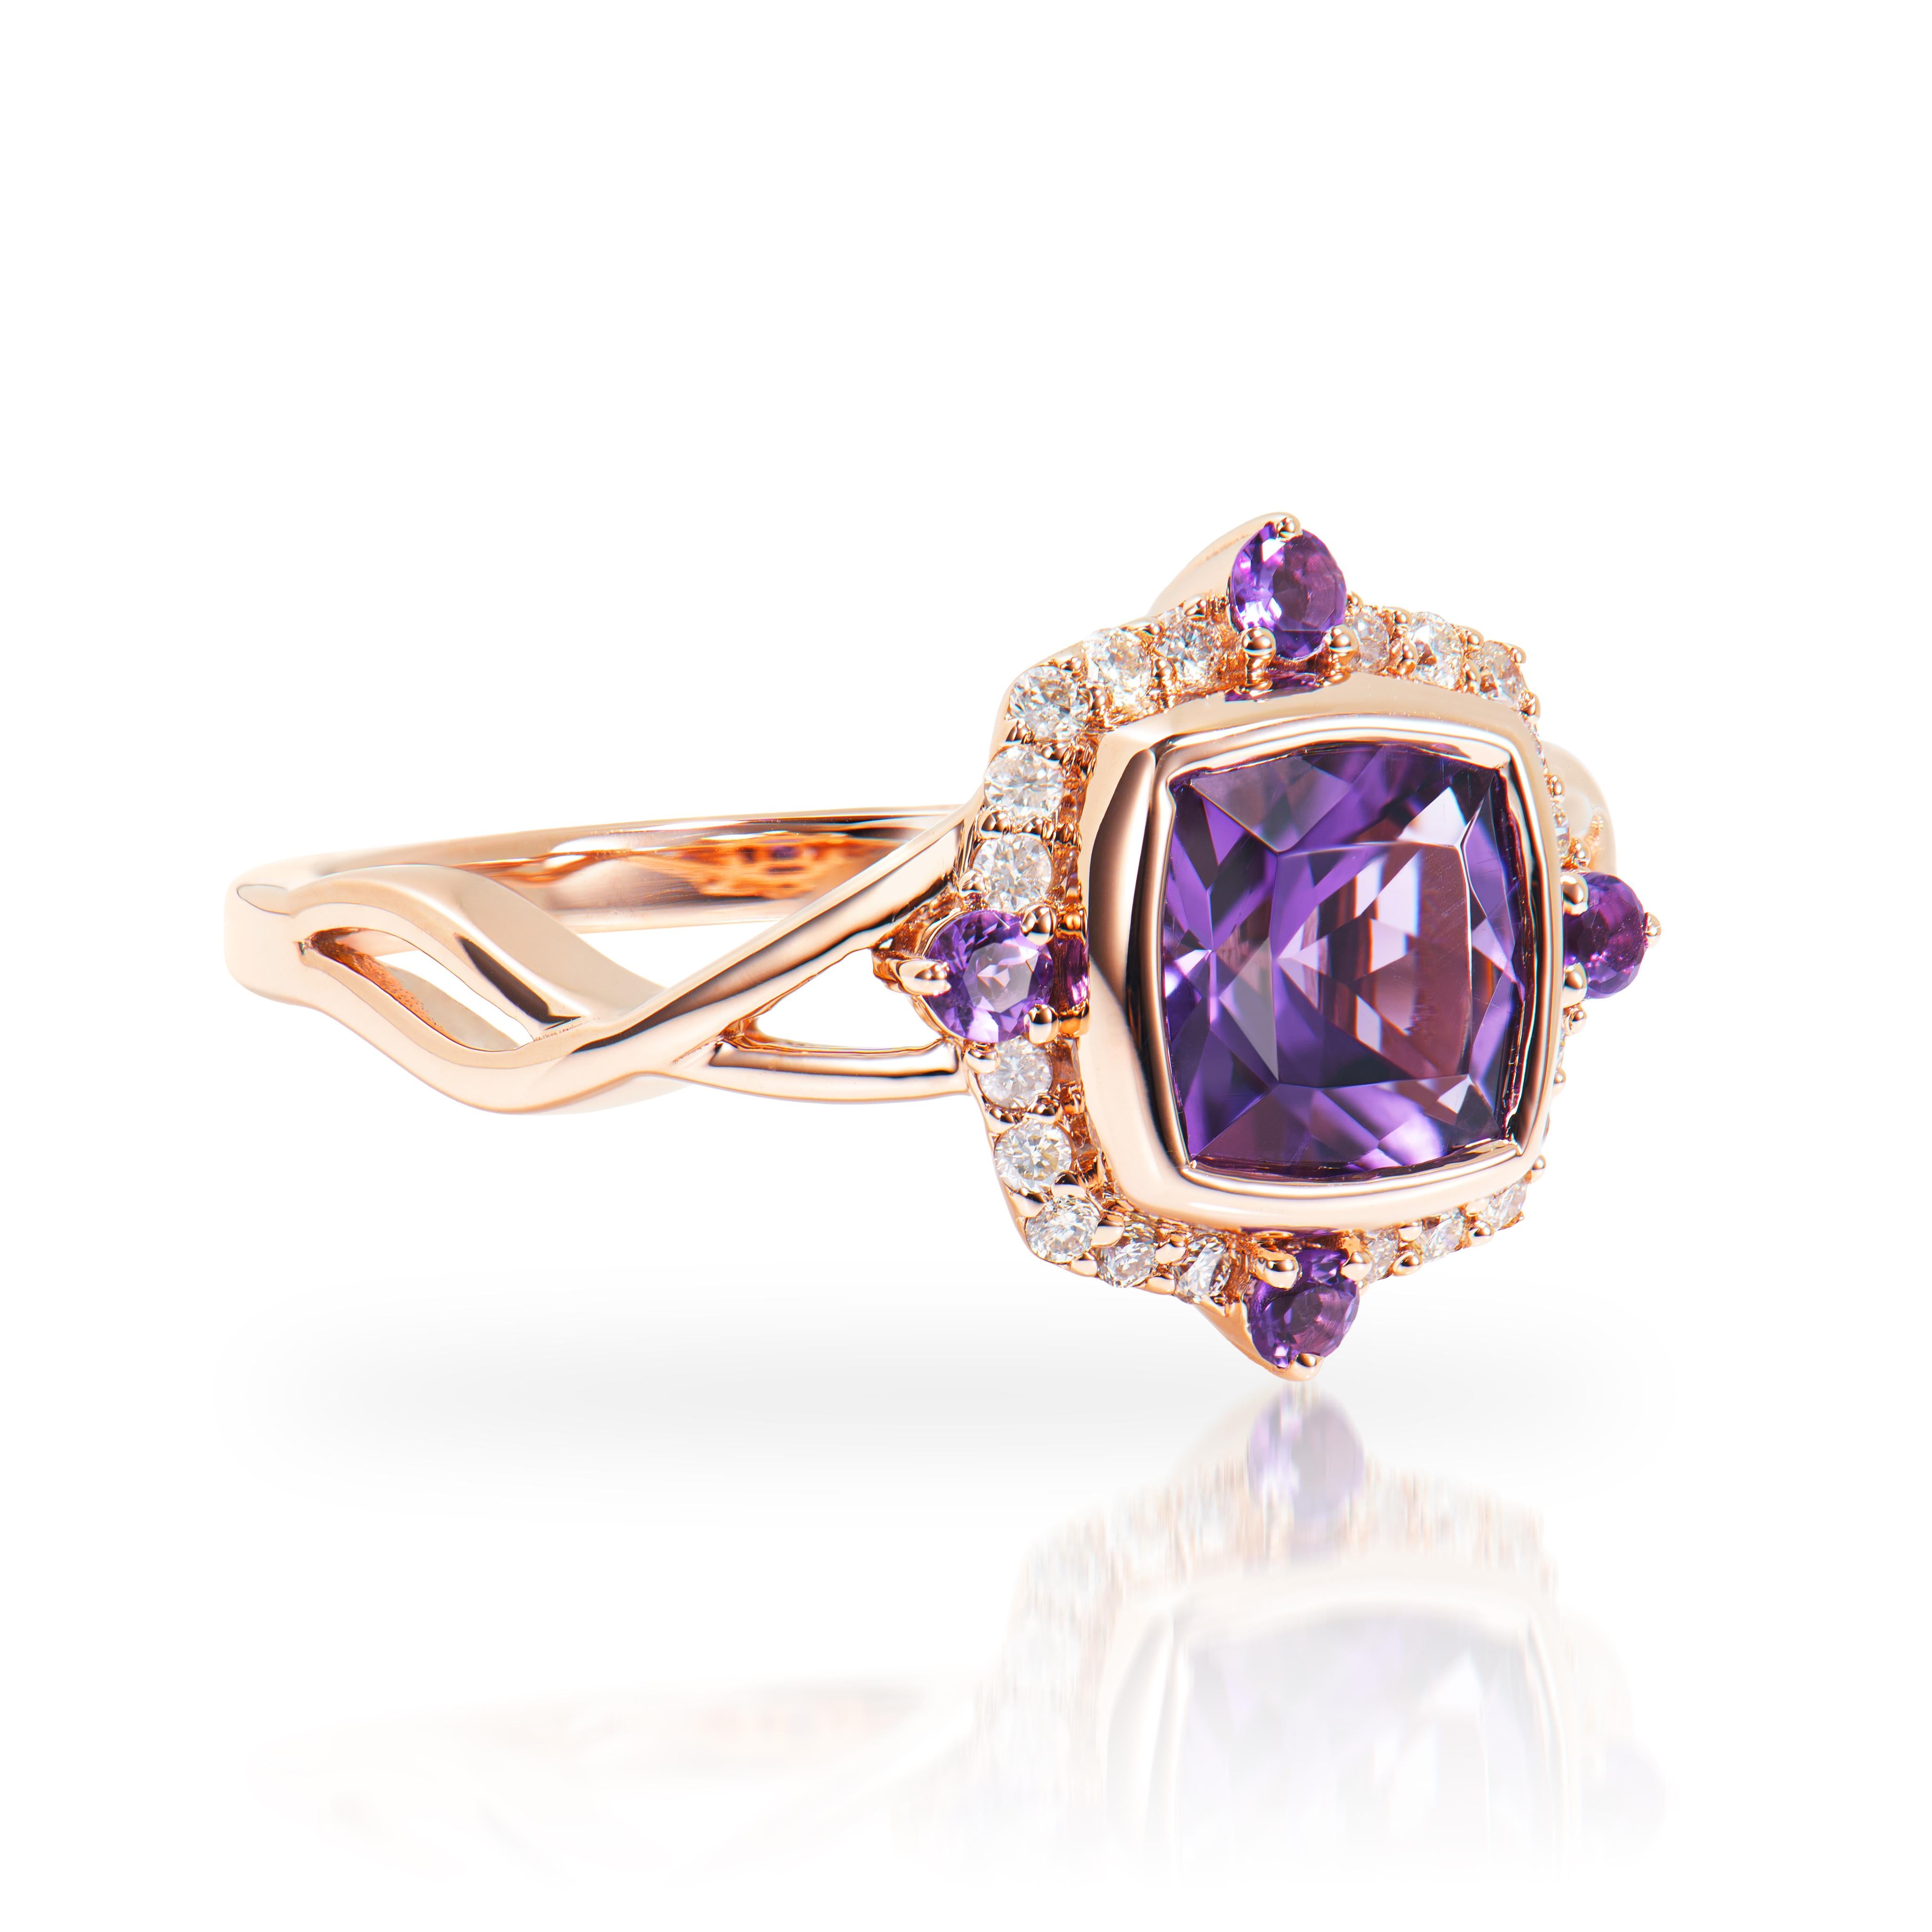 Presented A stunning variety of amethyst gemstones for those who respect quality and wish to wear them on any occasion or everyday basis. The rose gold amethyst fancy ring, embellished with diamonds, has a timeless and exquisite appeal.

Amethyst